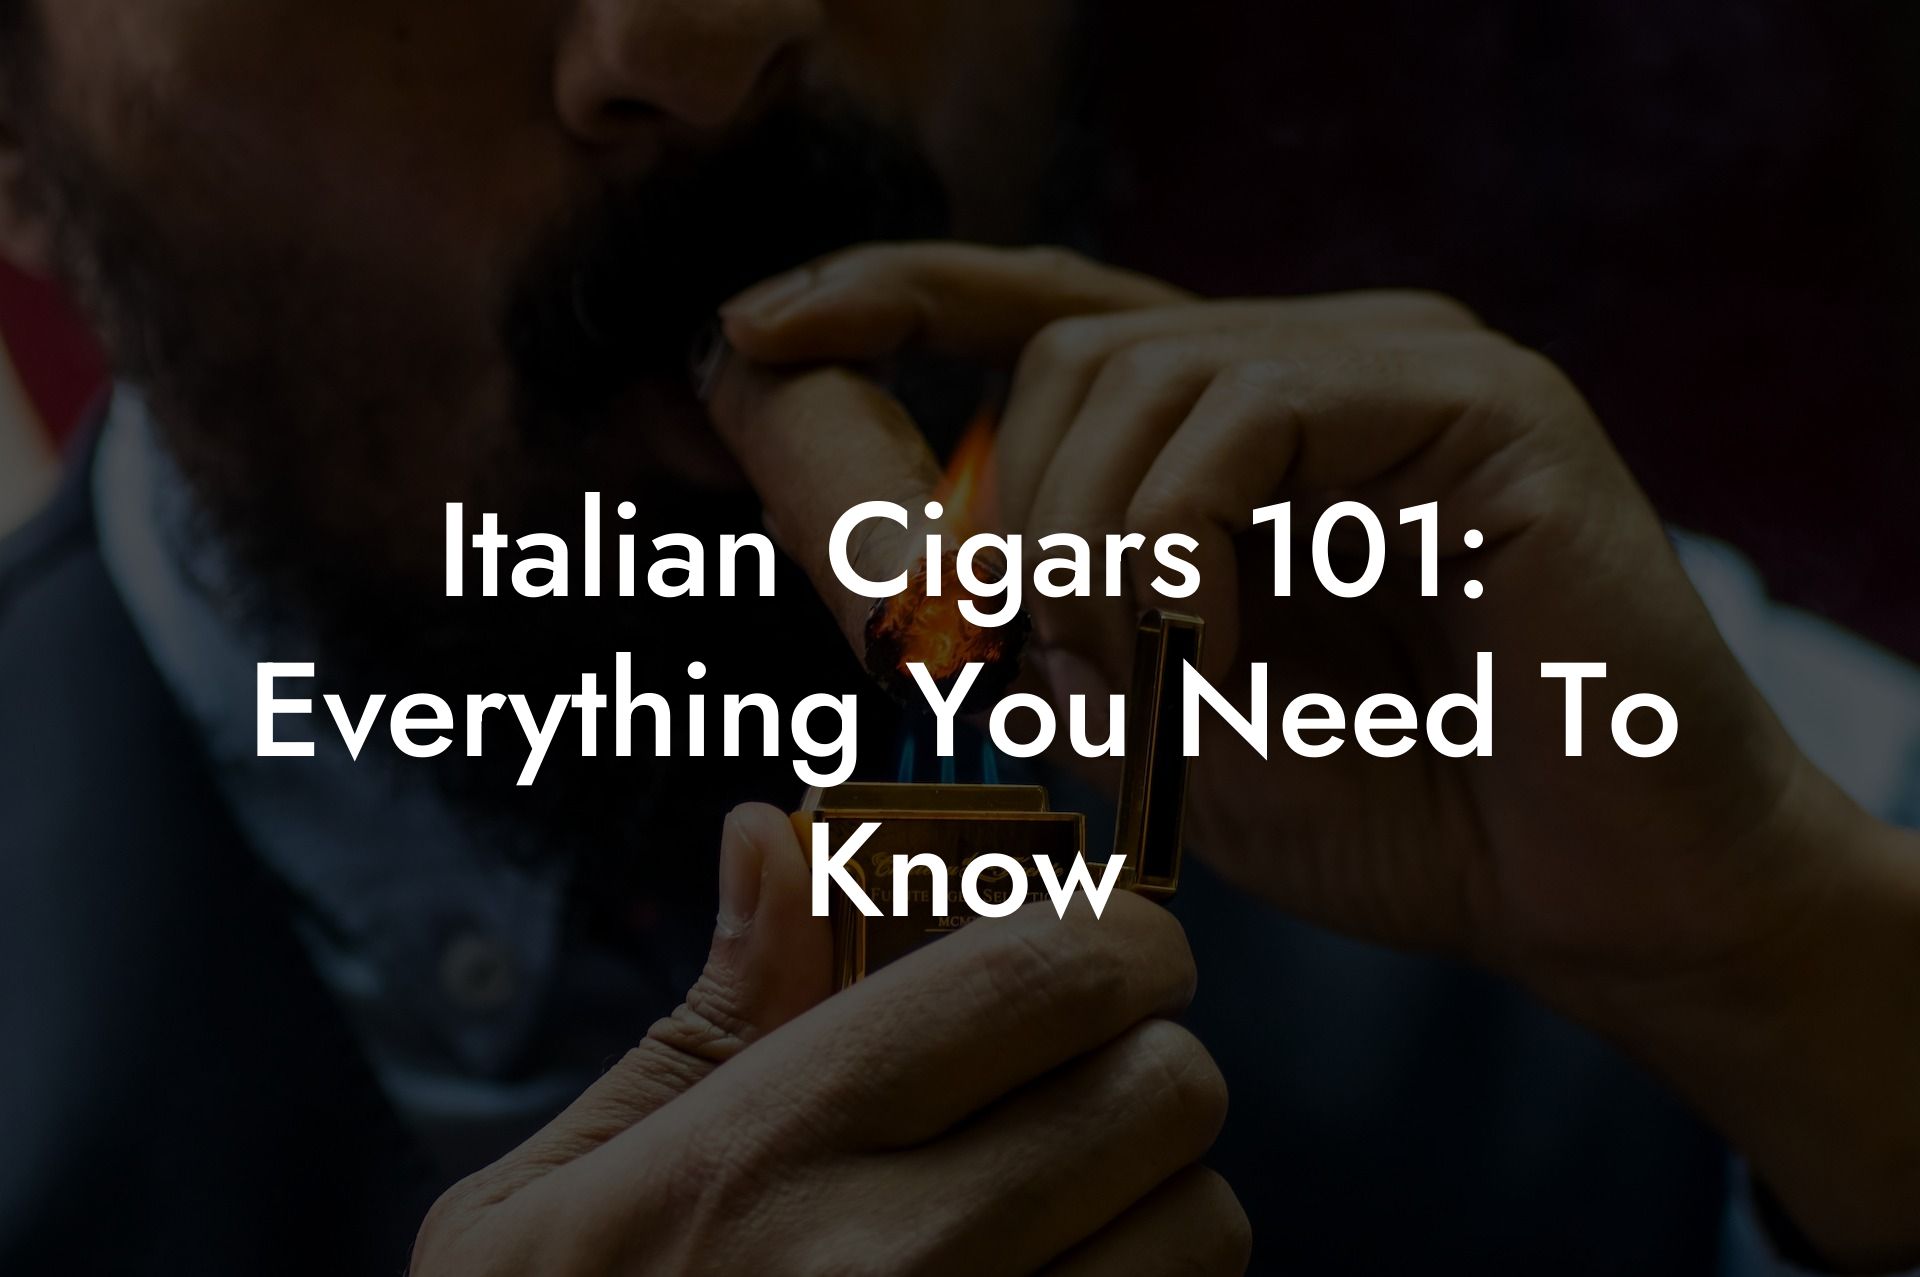 Italian Cigars 101: Everything You Need To Know